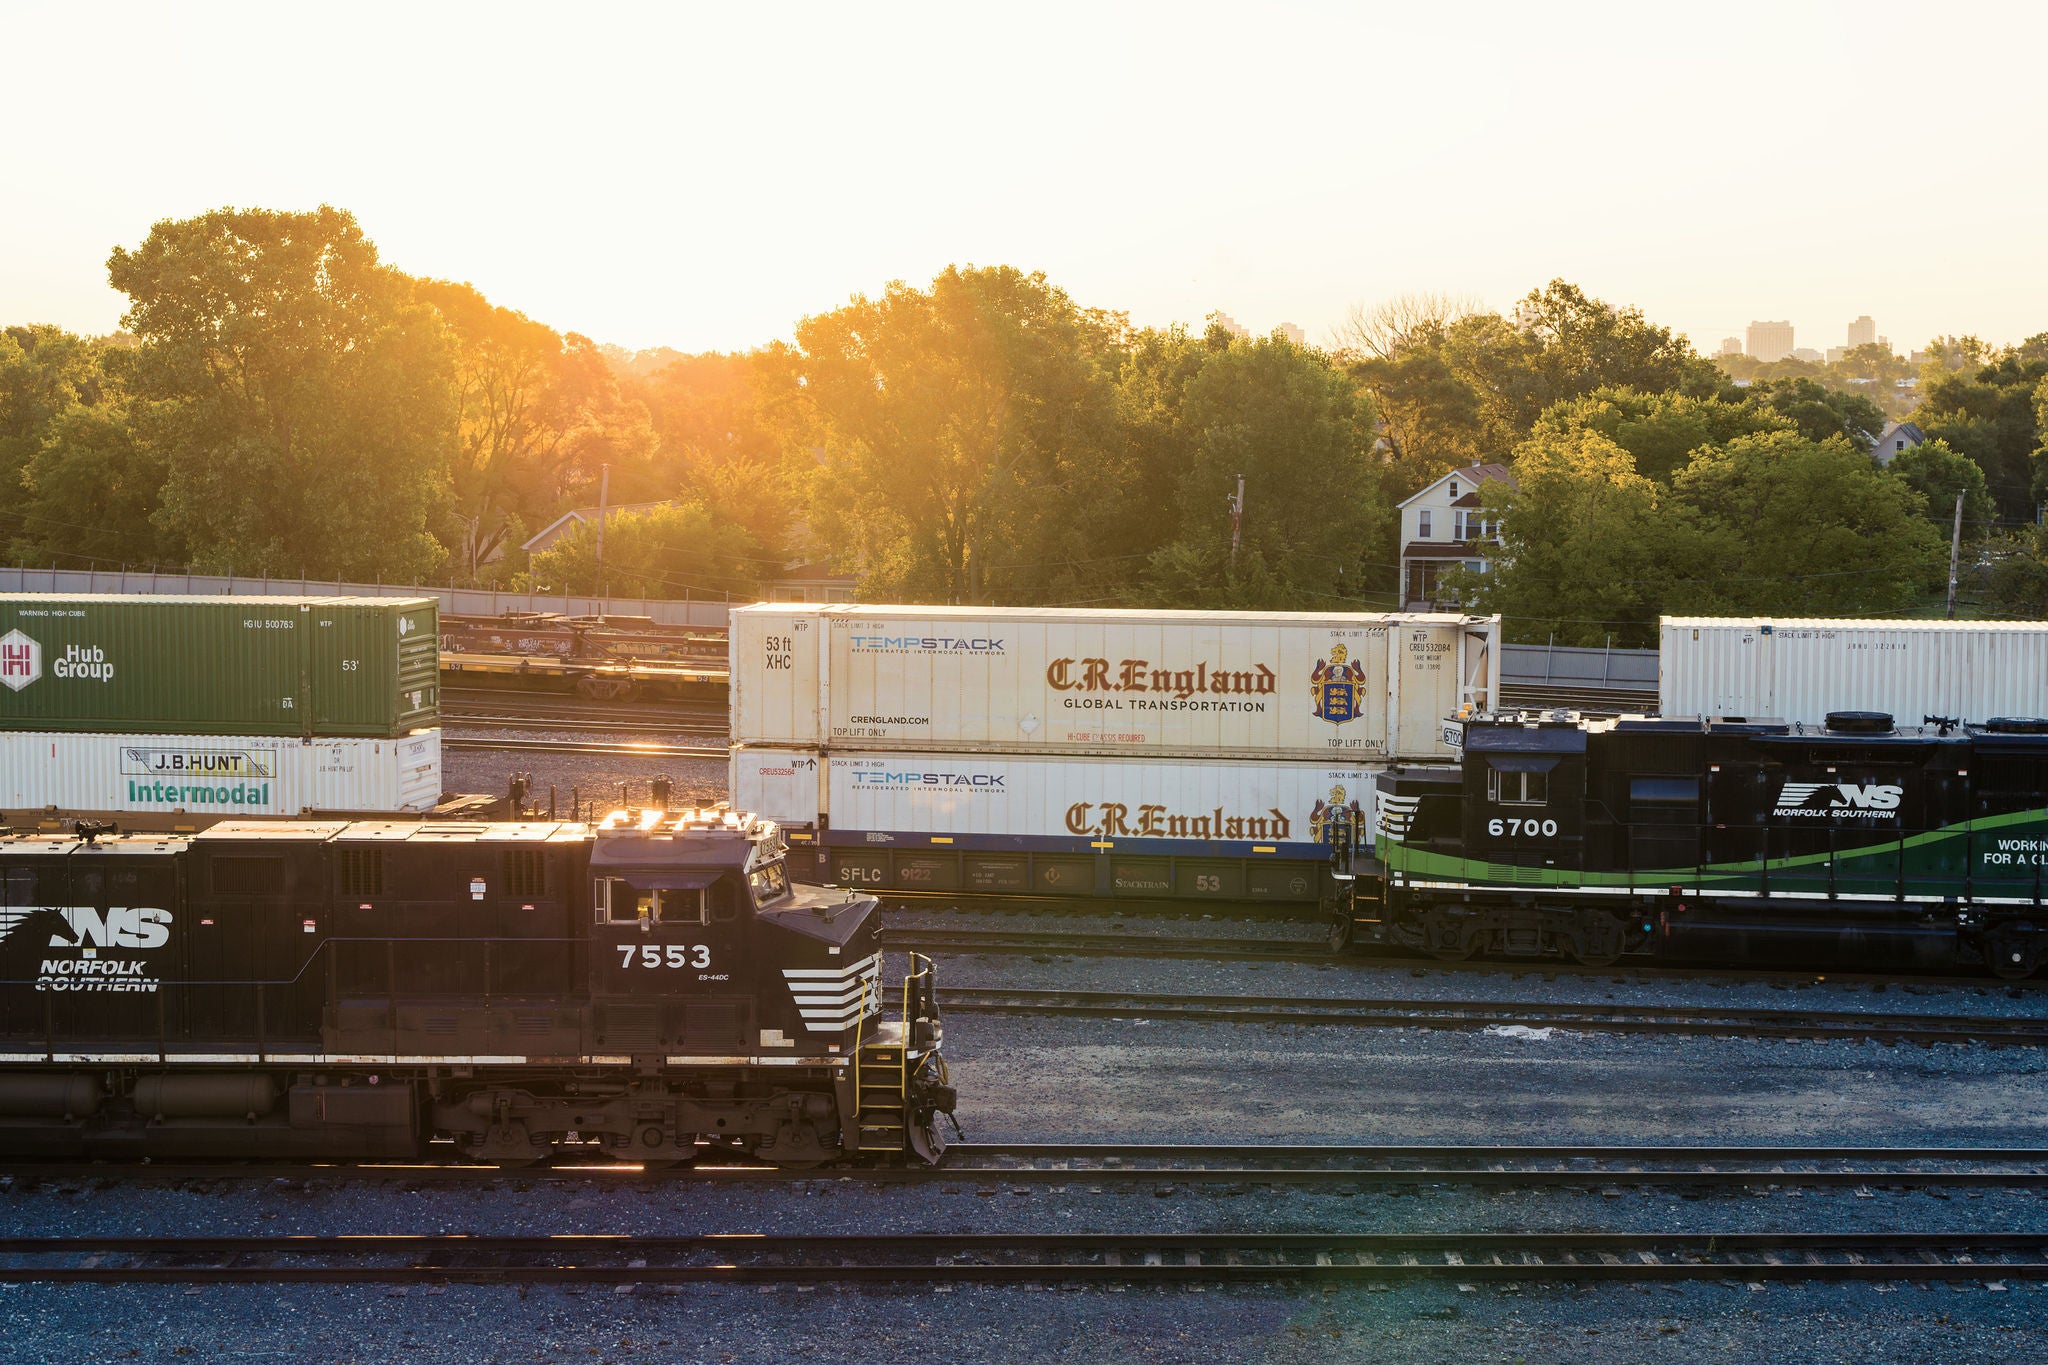 Two Norfolk Southern intermodal shipping trains heading in opposite directions on the company’s railway tracks.